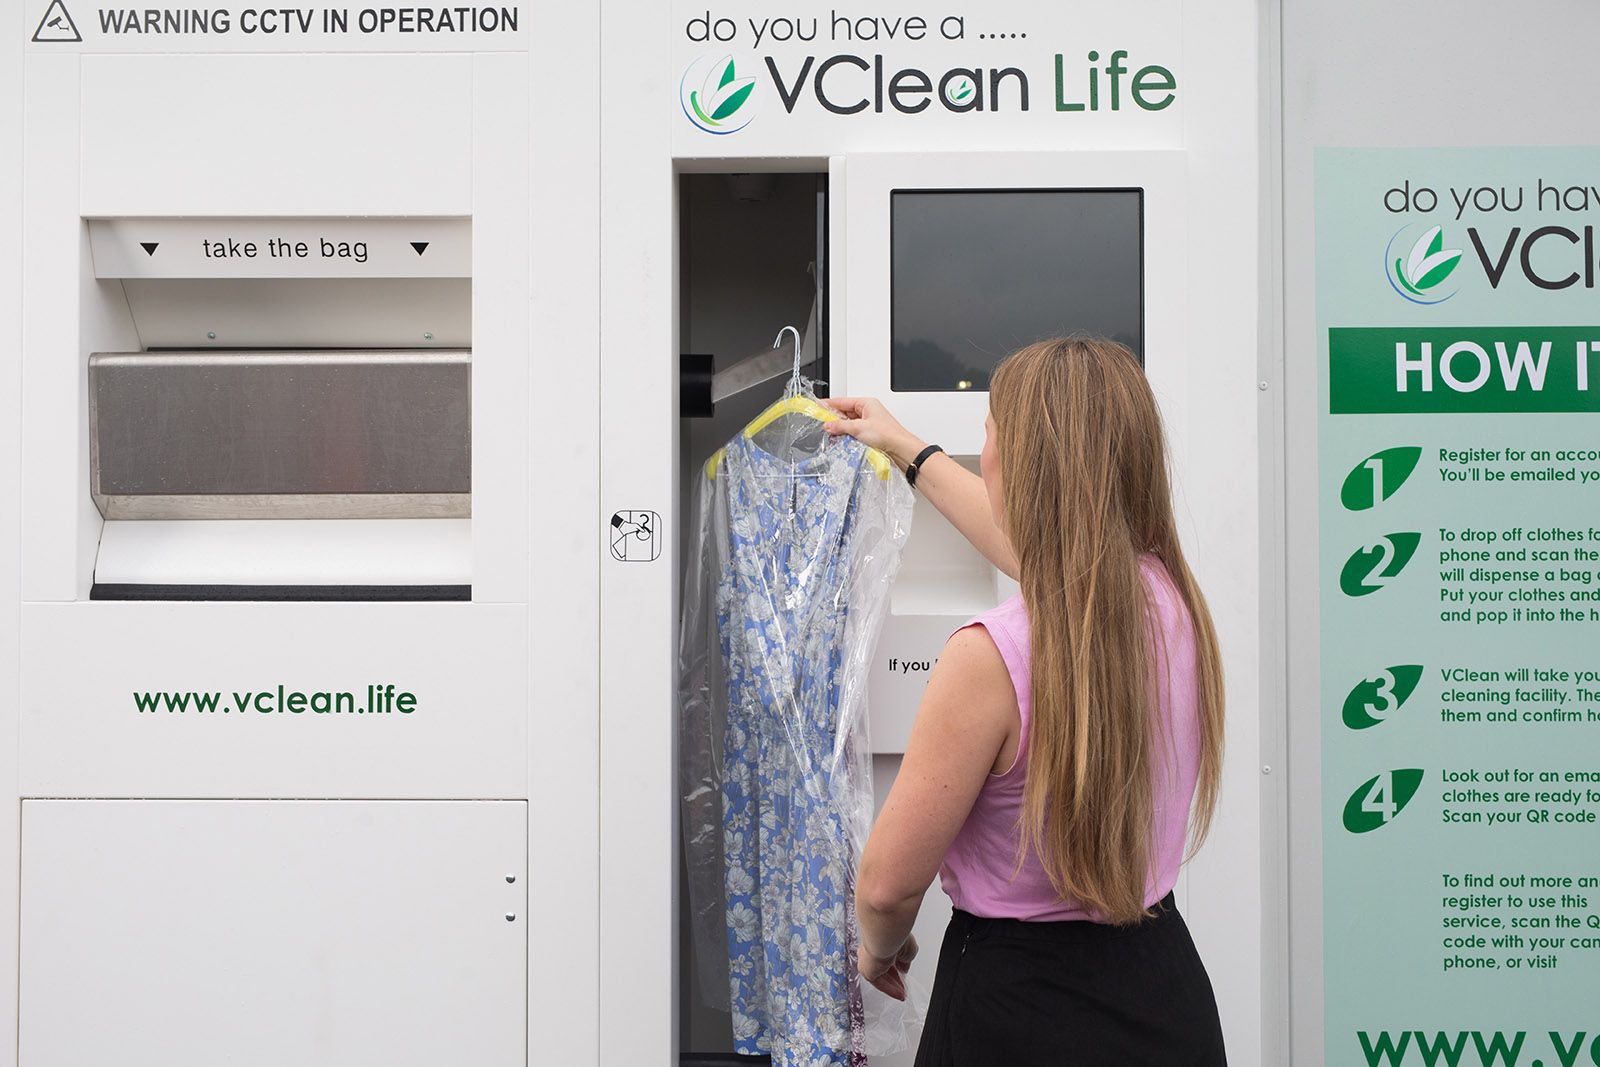 Eco-friendly laundry vending machines start to appear across London Tube network image 1